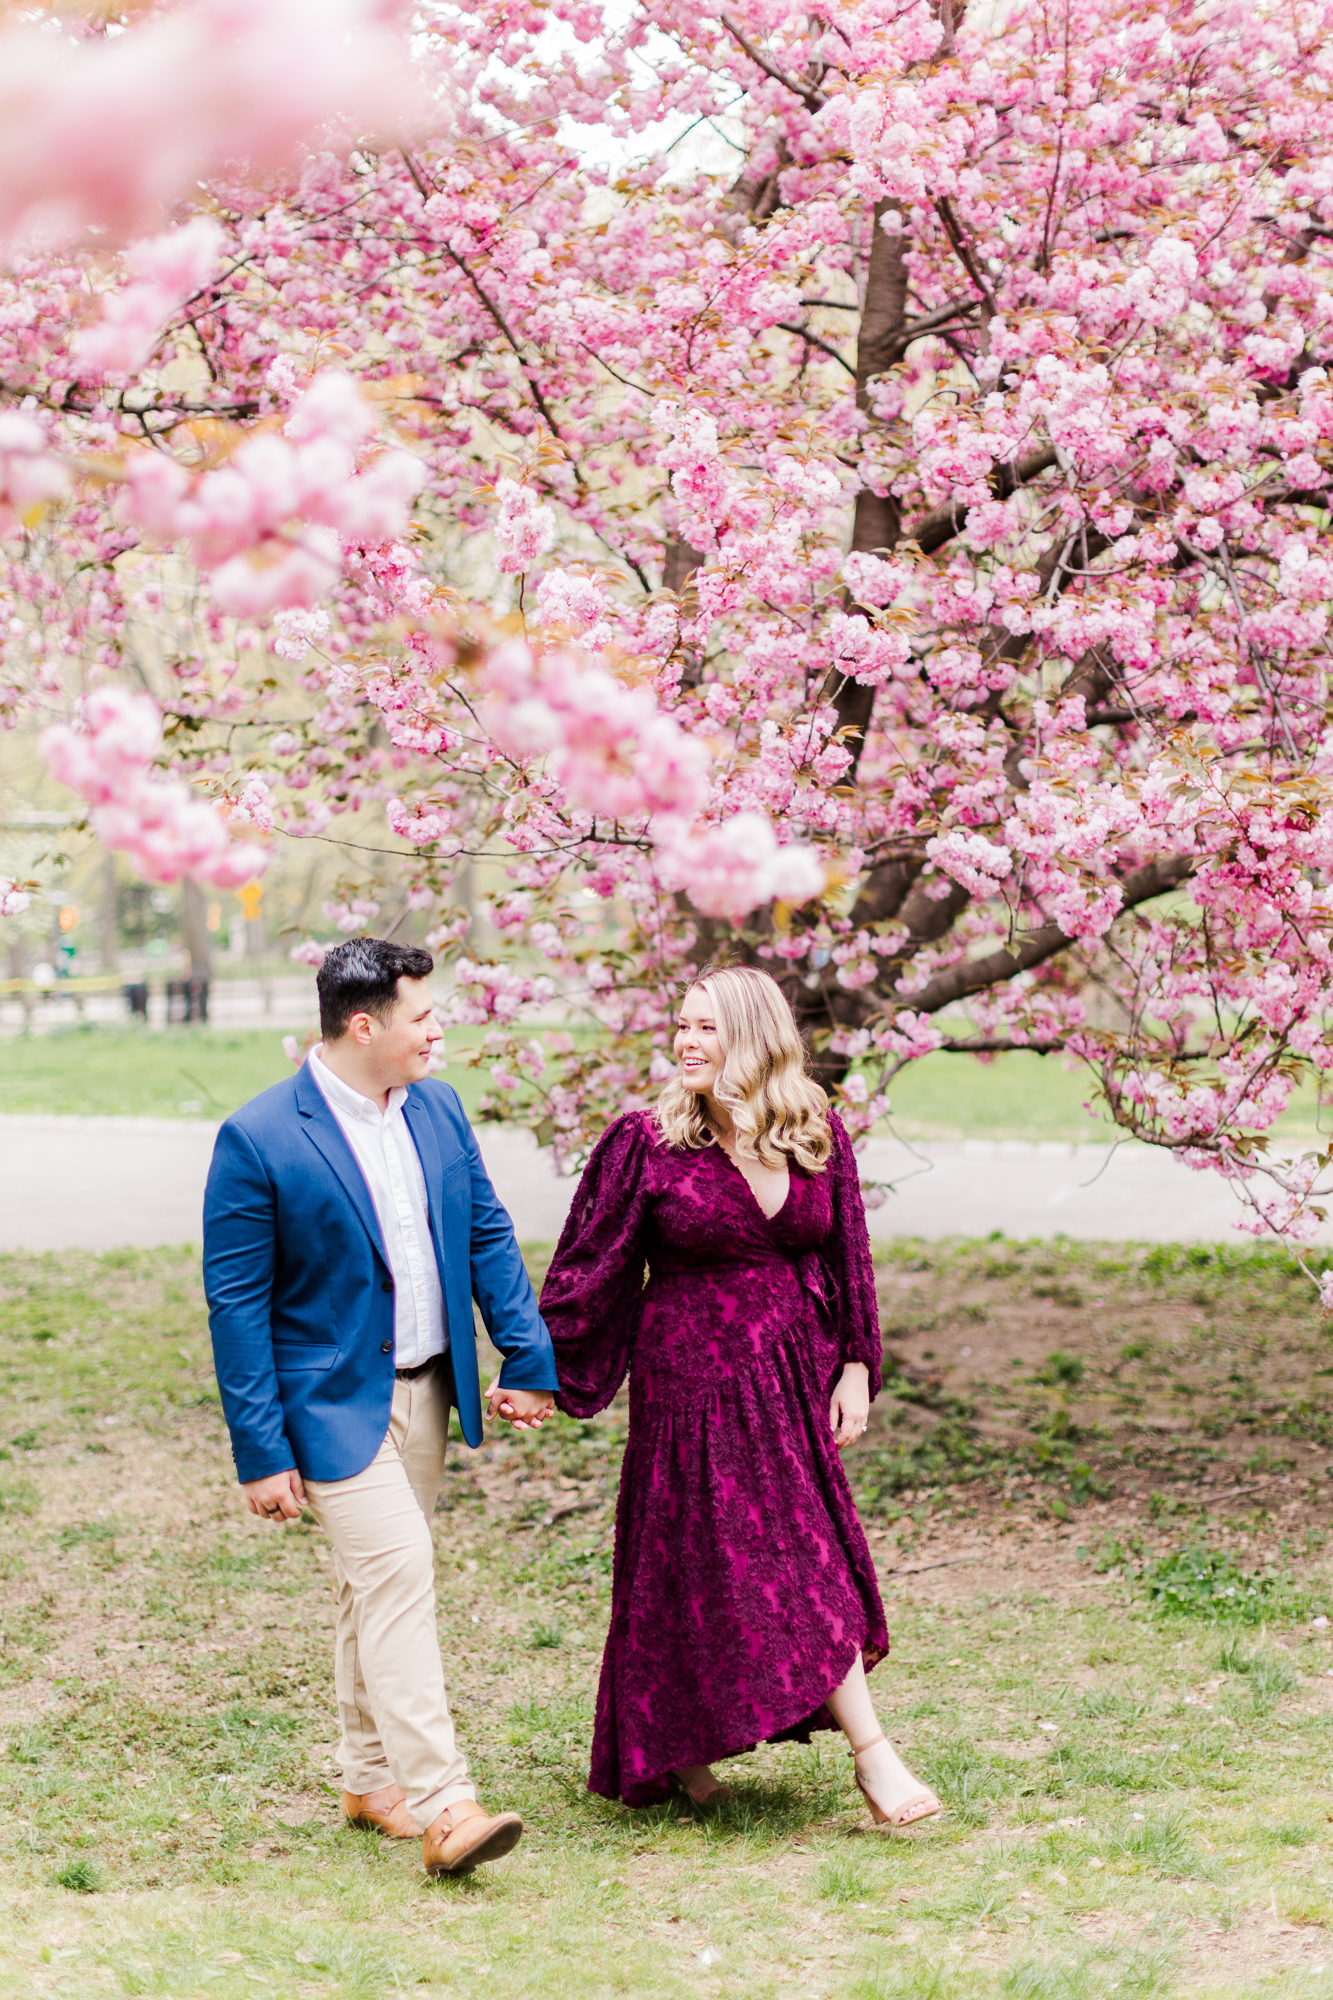 Iconic Engagement Pictures in Central Park